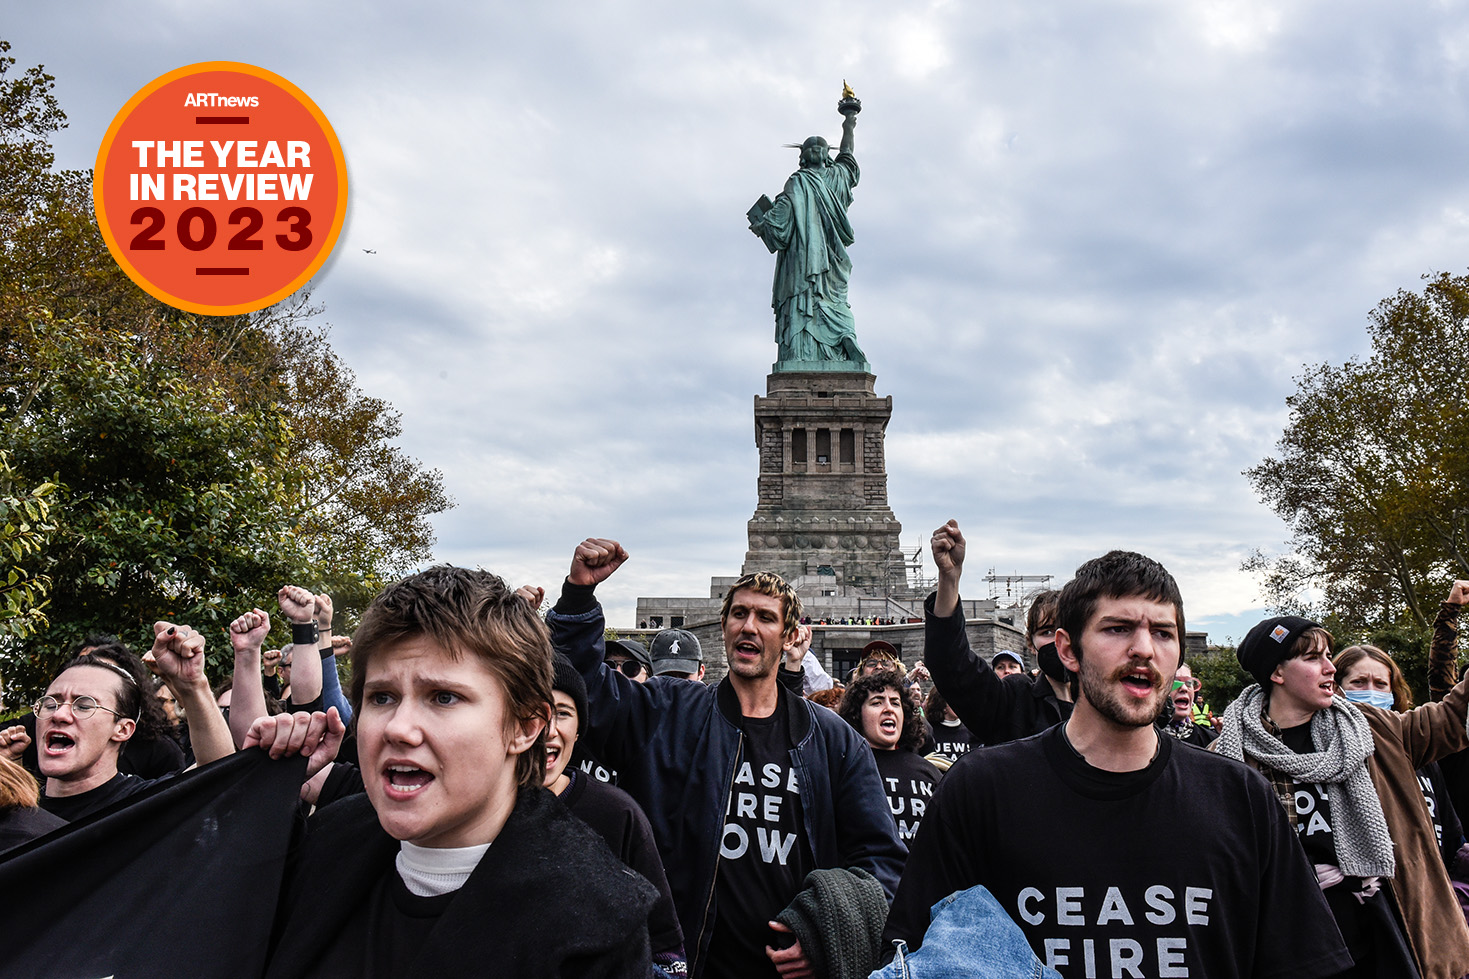 Many people in black shirts reading "Ceasefire Now" shout in front of the Statue of Liberty.